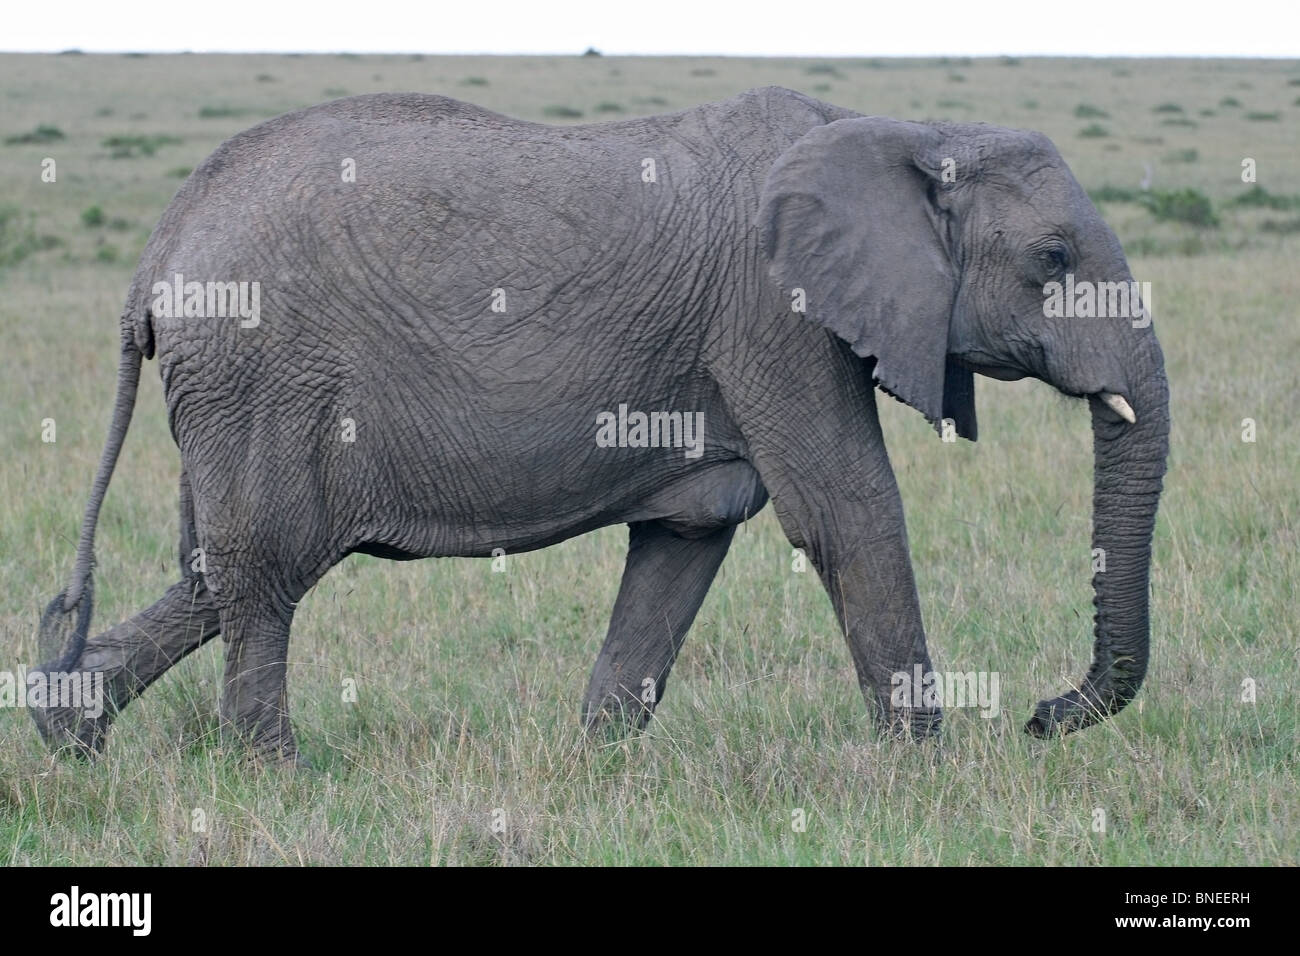 African Elephant standing in the grasslands of Masai Mara National Reserve, Kenya East Africa Stock Photo